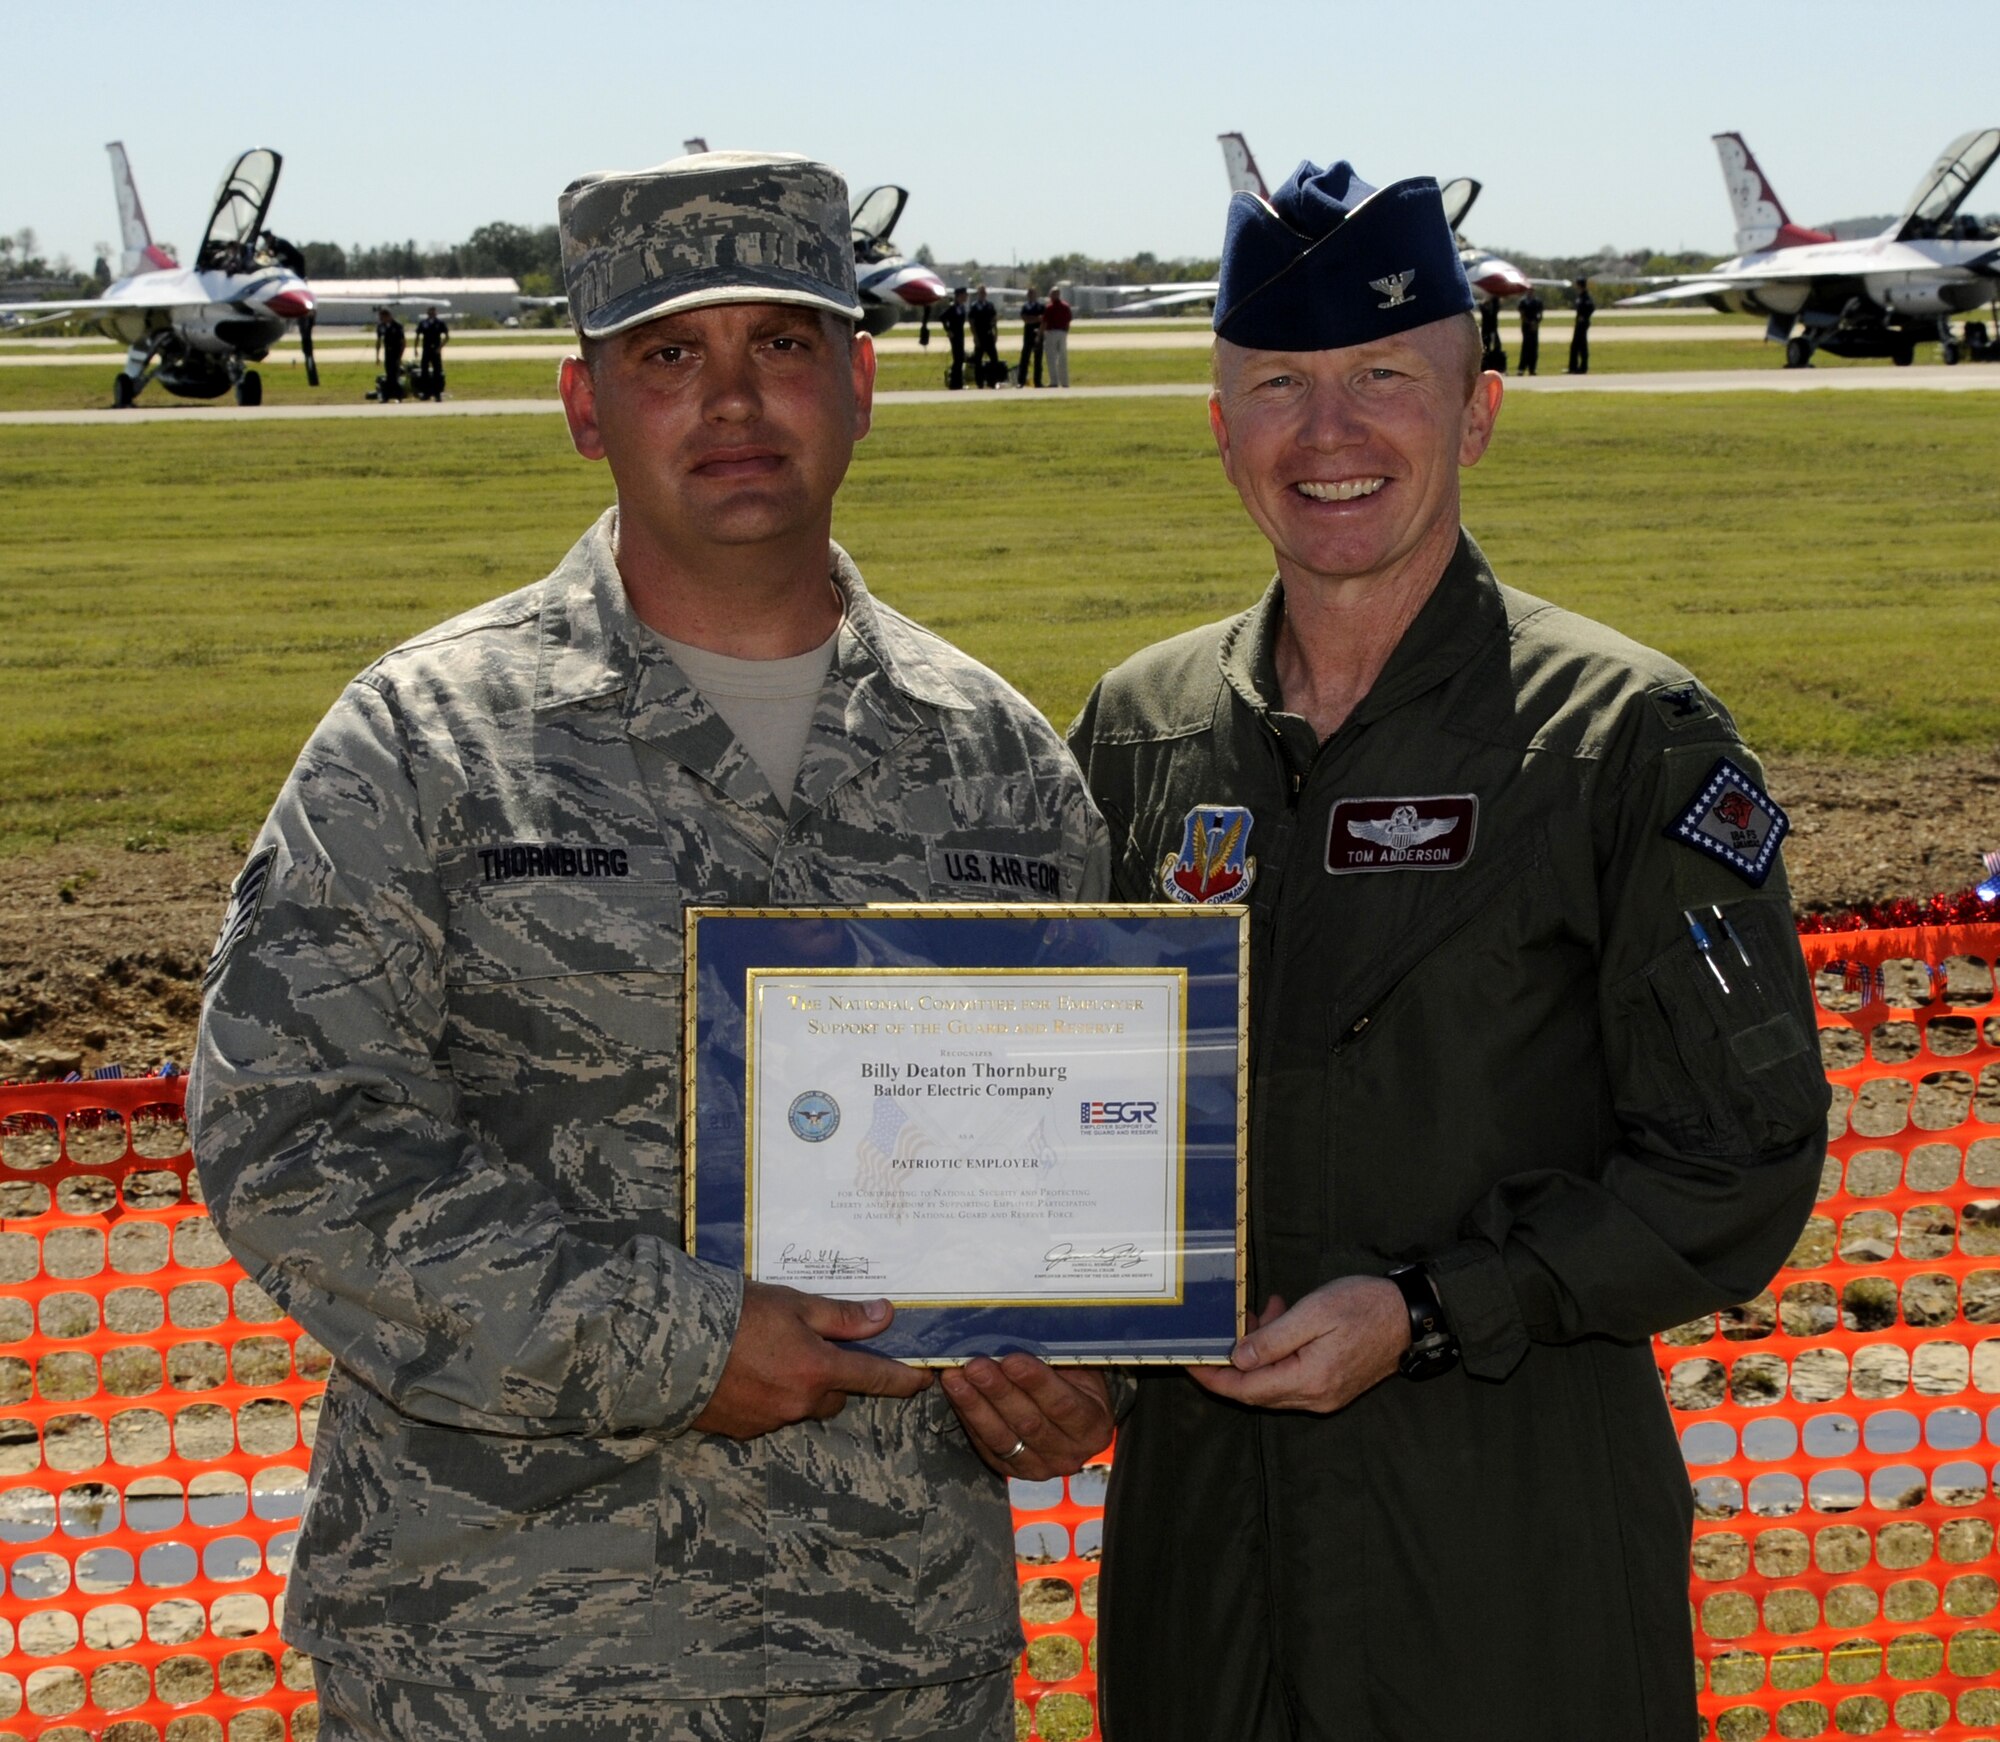 Tech Sgt. Billy Thornburg, 188th Fighter Wing member and Baldor employee, left, and Col. Tom Anderson, 188th Fighter Wing commander pose for a photo. Baldor was recognized with an Employer Support of the Guard and Reserve (ESGR) Patriot Award Sept. 30 at the 188th Fighter Wing. The accolade honors employers that have exhibited immense support of their employees’ careers in the National Guard or Reserves. (U.S. Air Force photo by Senior Master Sgt. Dennis Brambl/188th Fighter Wing Public Affairs)